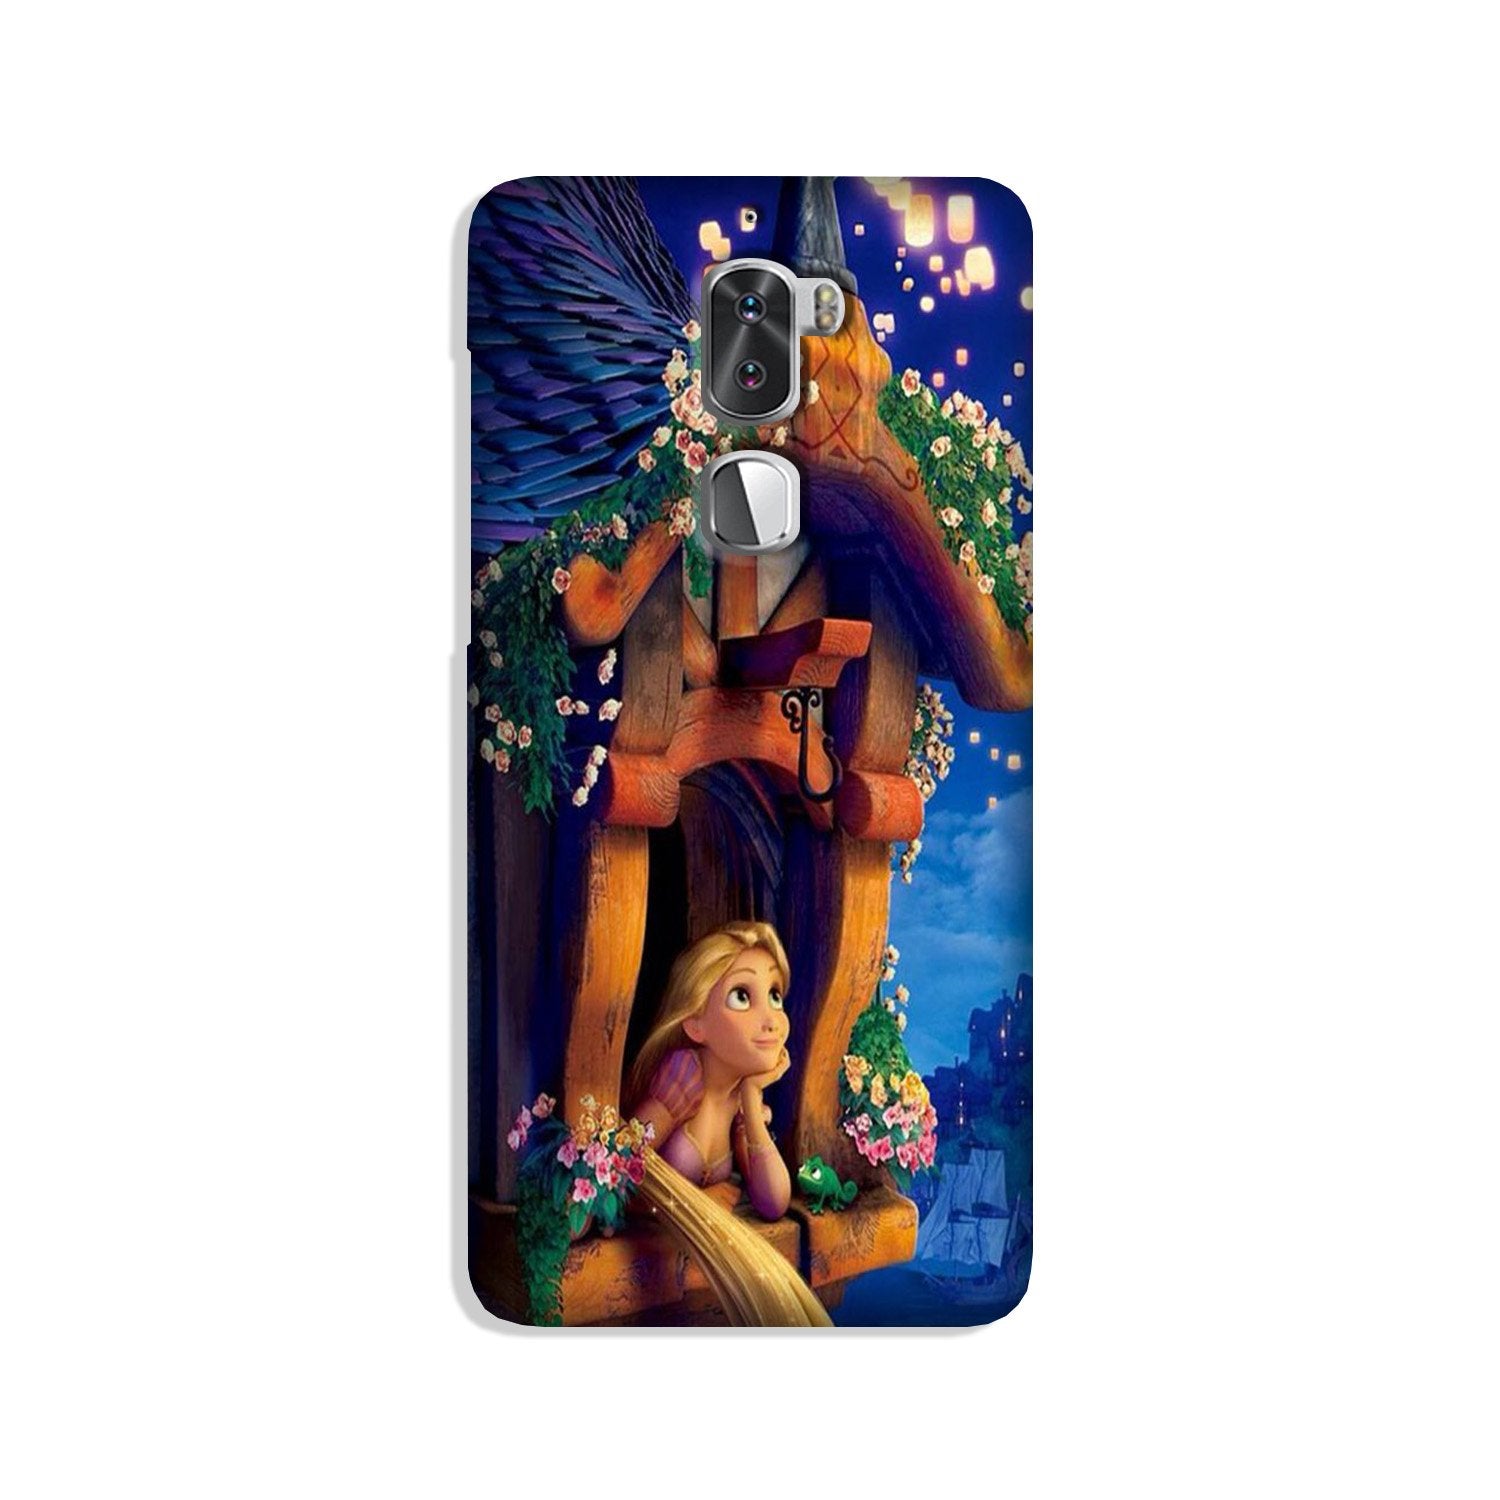 Cute Girl Case for Coolpad Cool 1 (Design - 198)